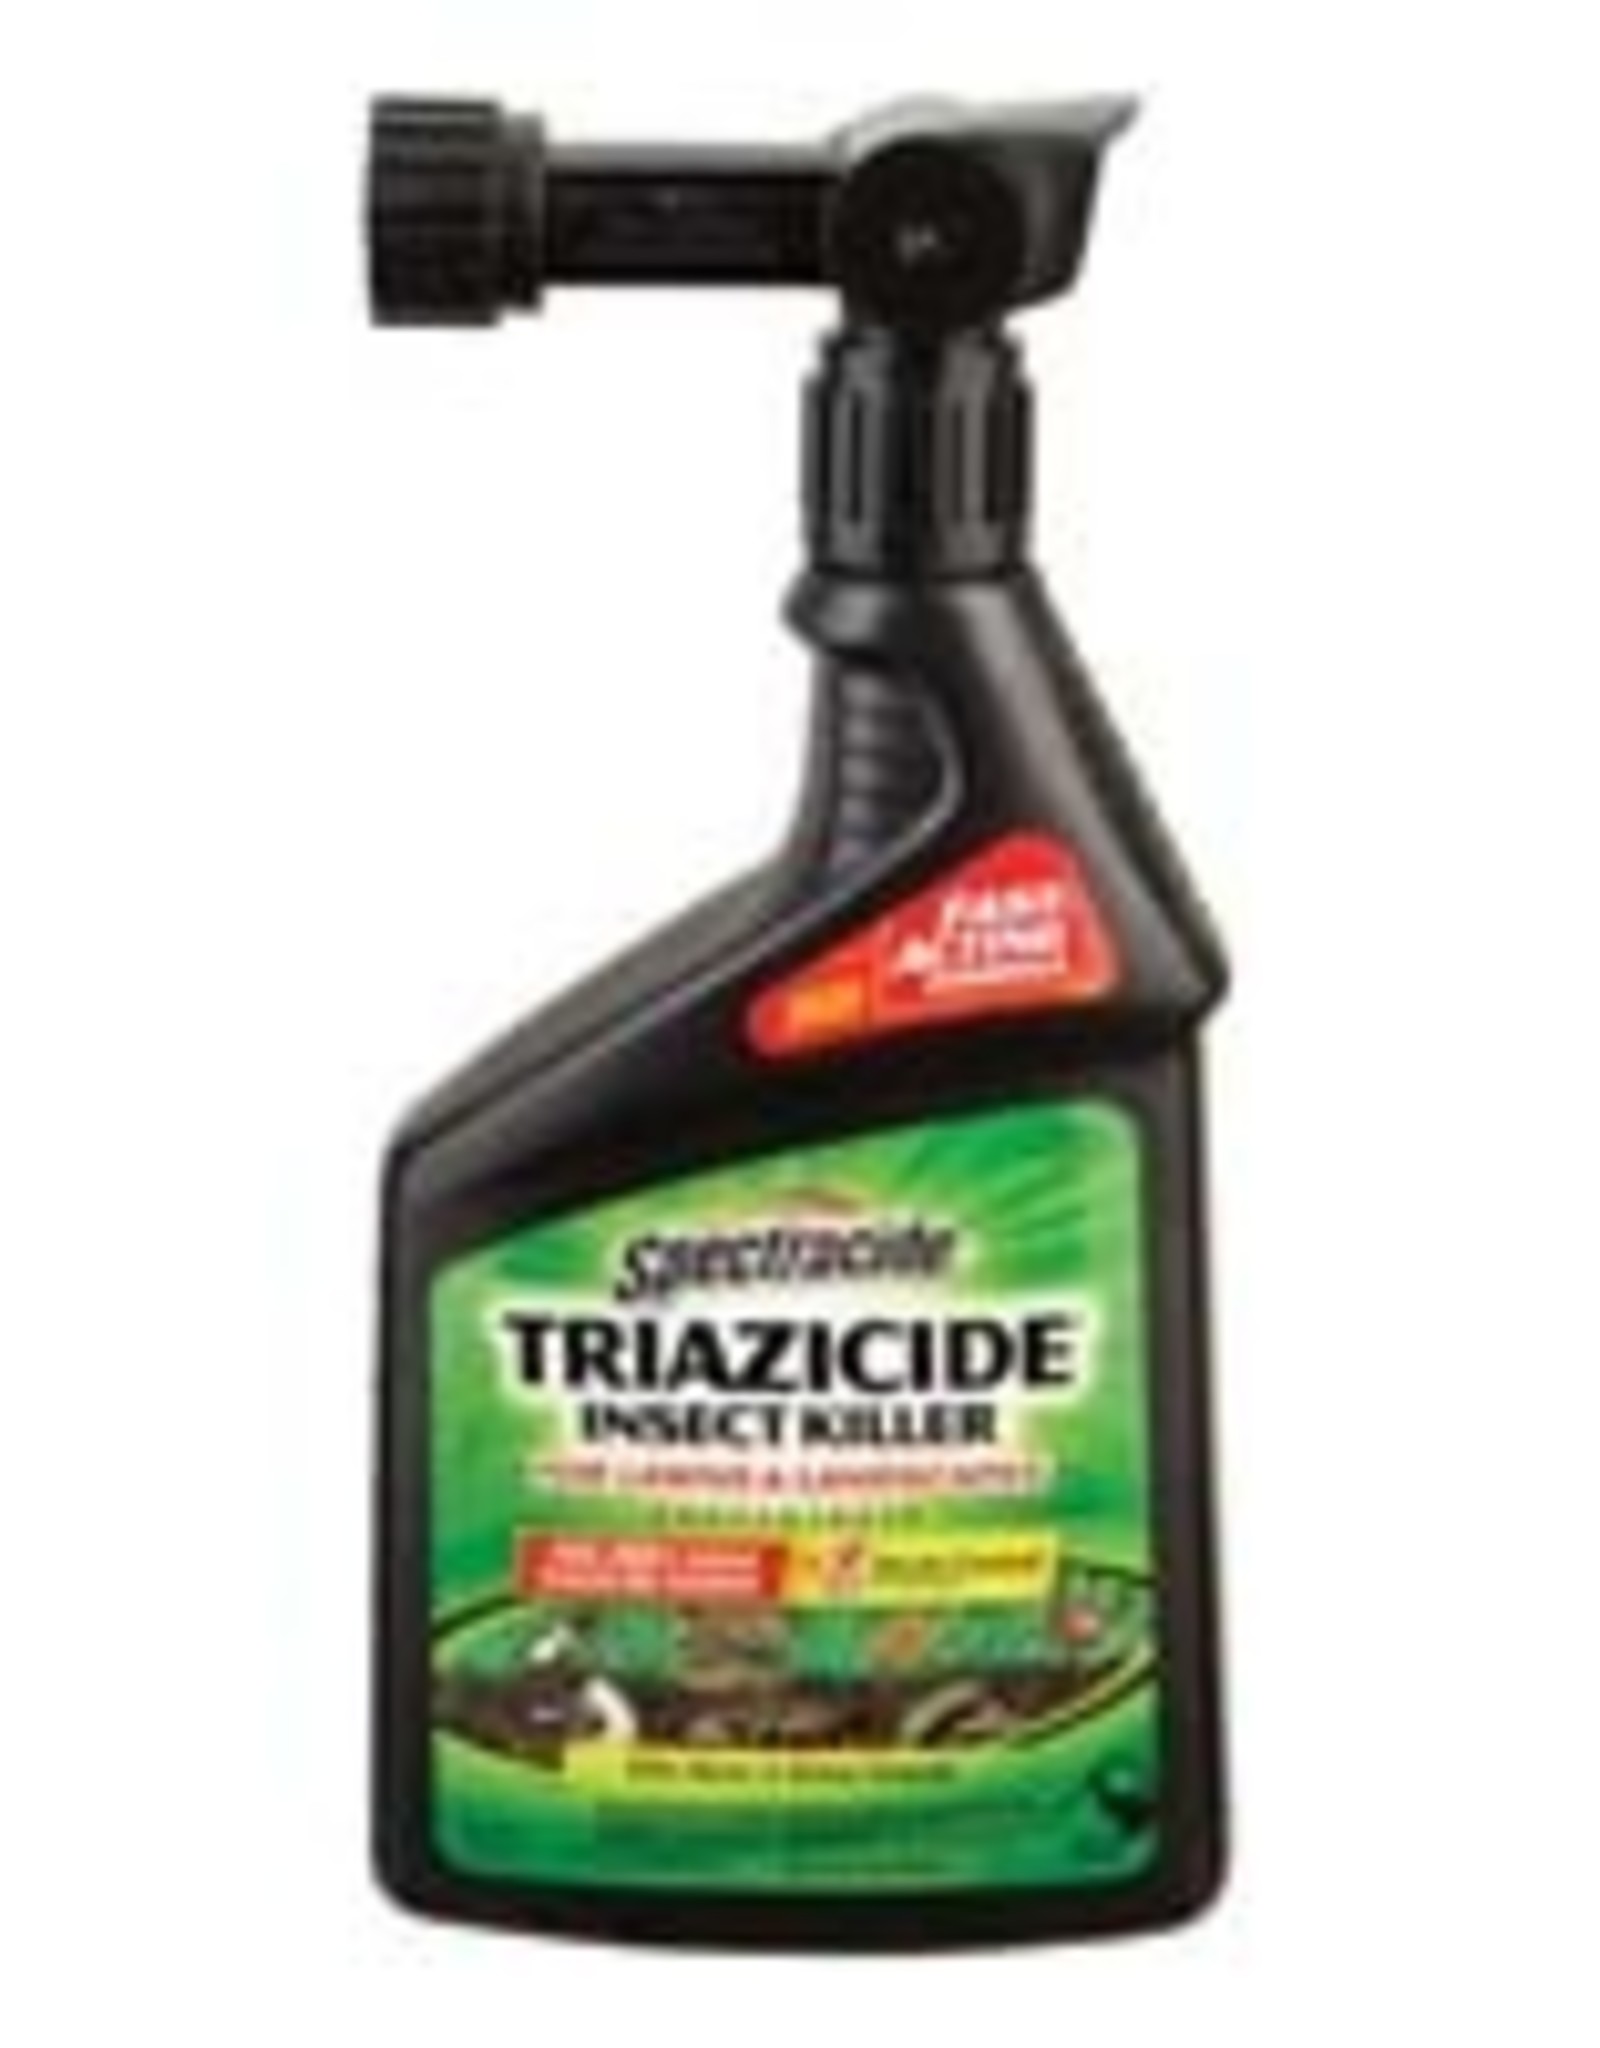 United Ind. Corp/Spectrum Spectracide Triazicide Once and Done Insect Killer RTS - 32 oz